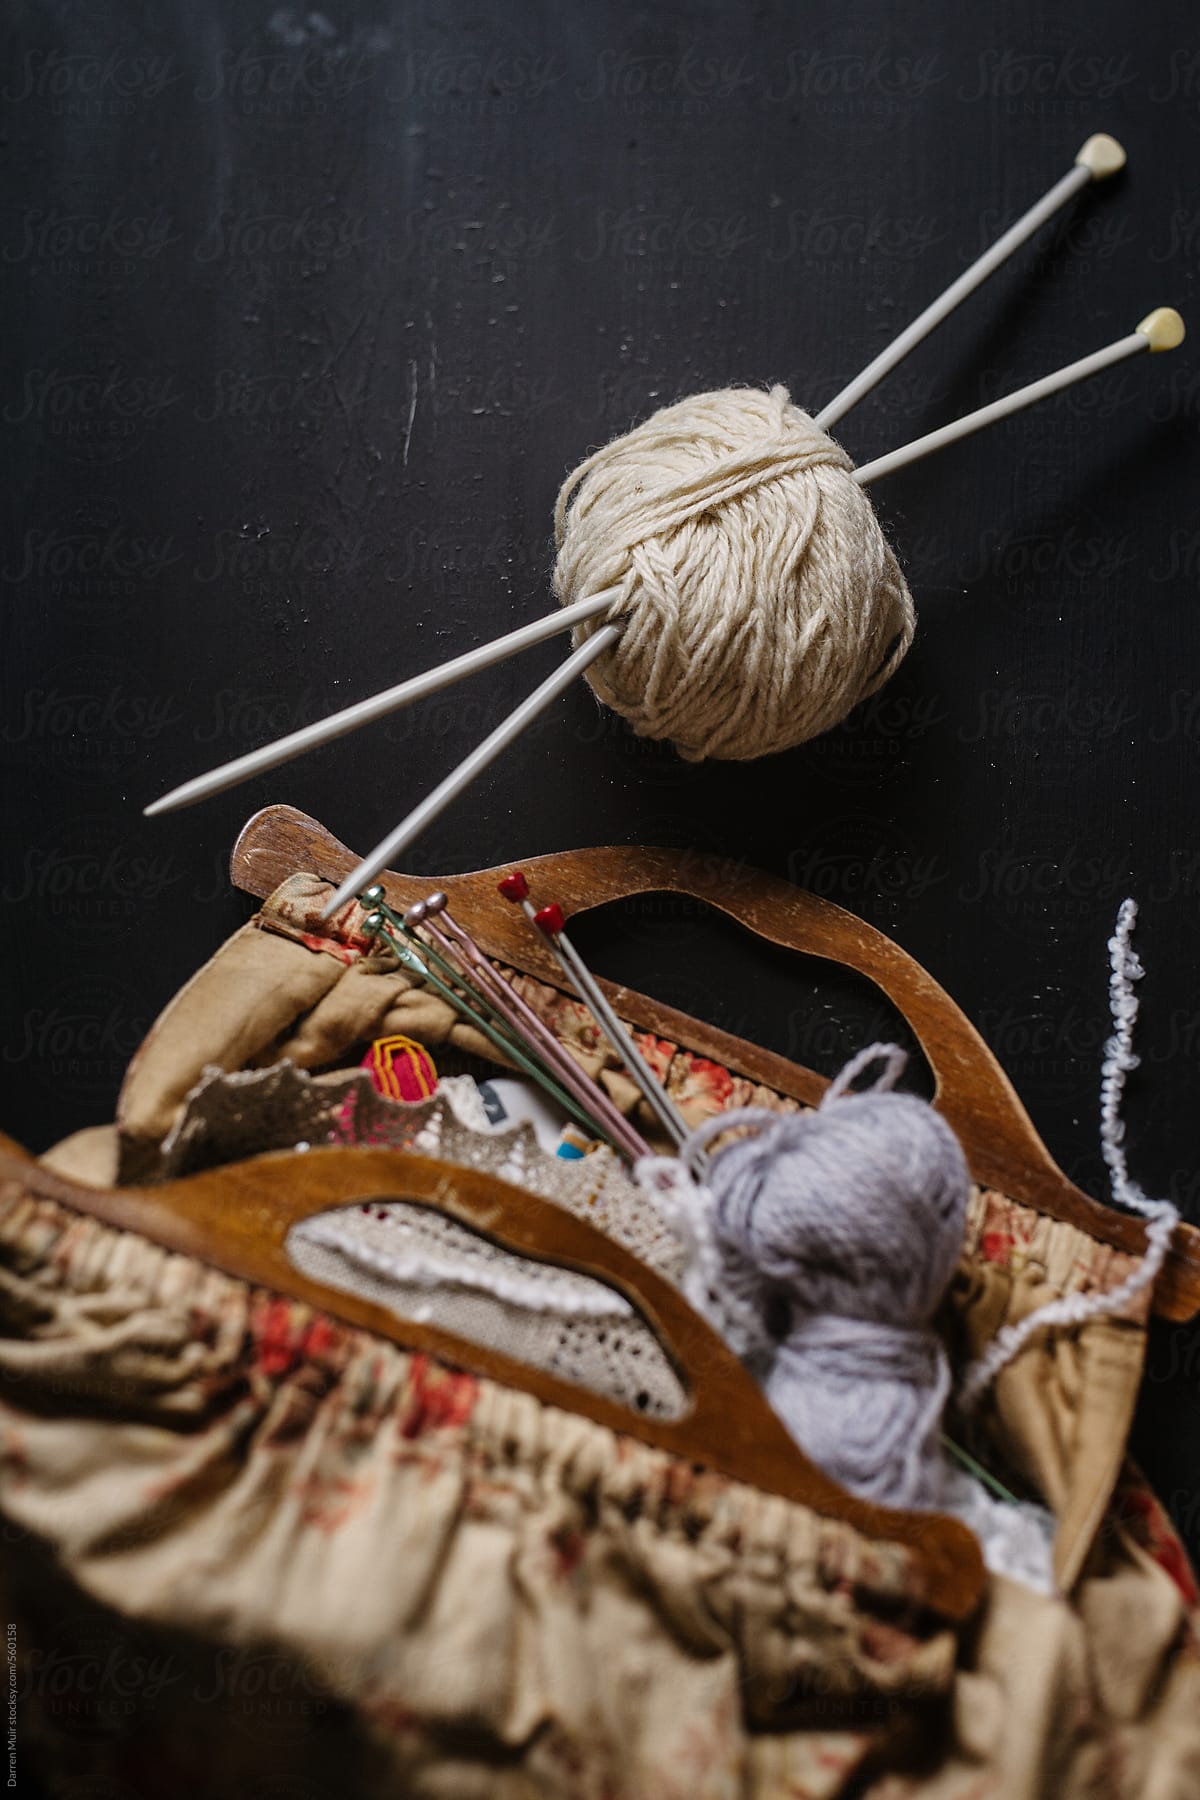 Ball of wool with knitting needles and knitting bag with contents,selective focus.